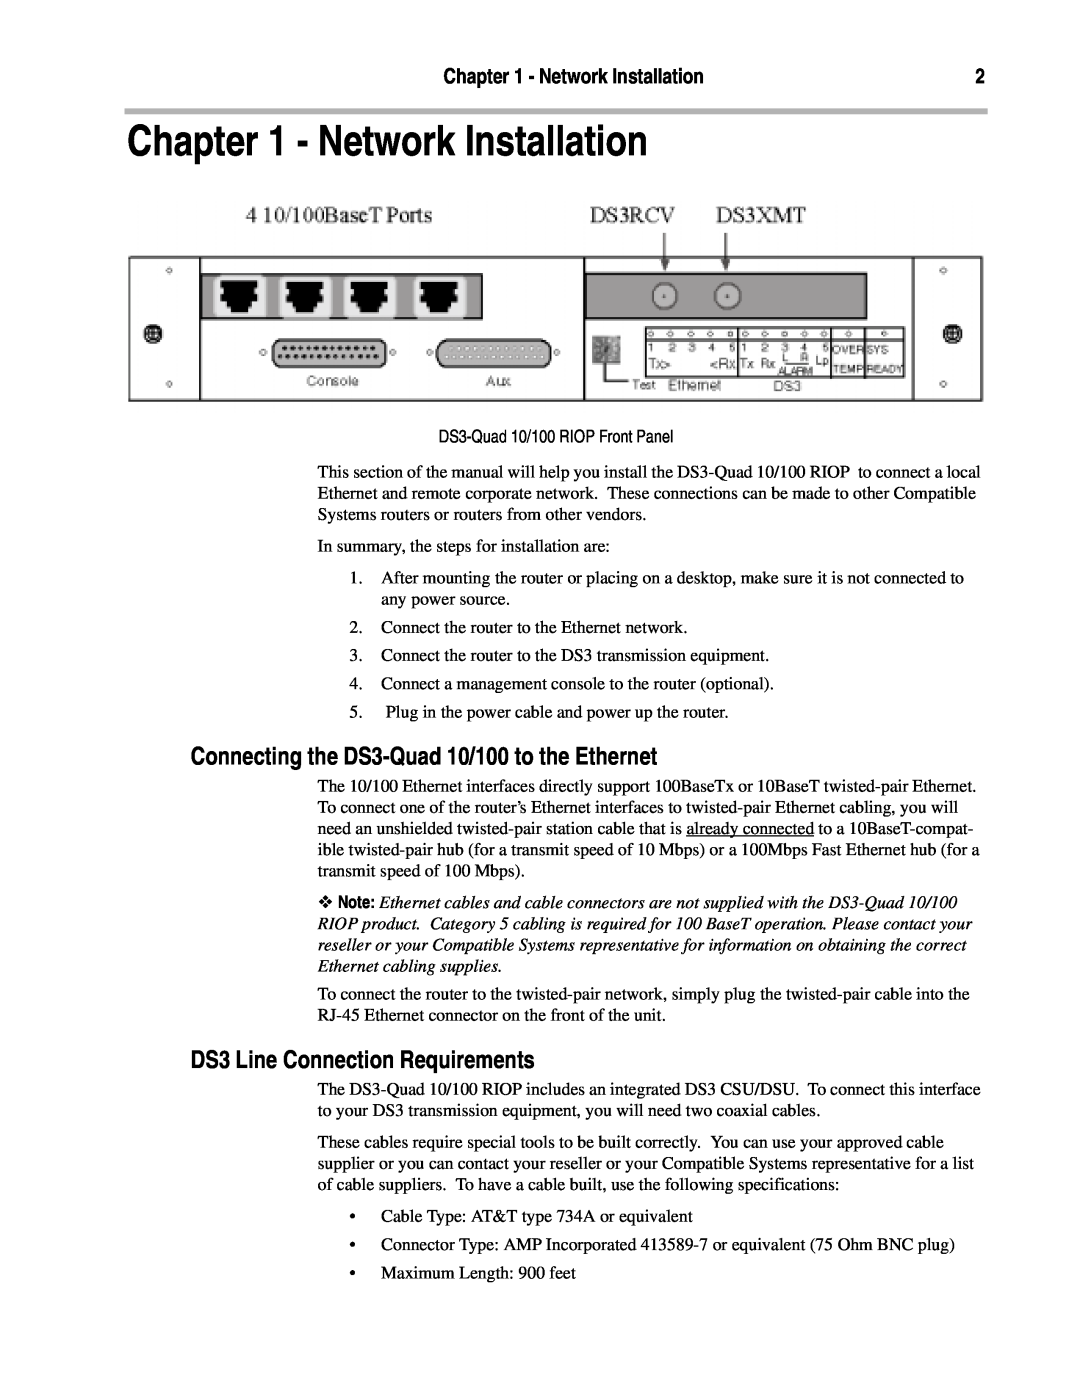 Compatible Systems manual Network Installation, Connecting the DS3-Quad 10/100 to the Ethernet 